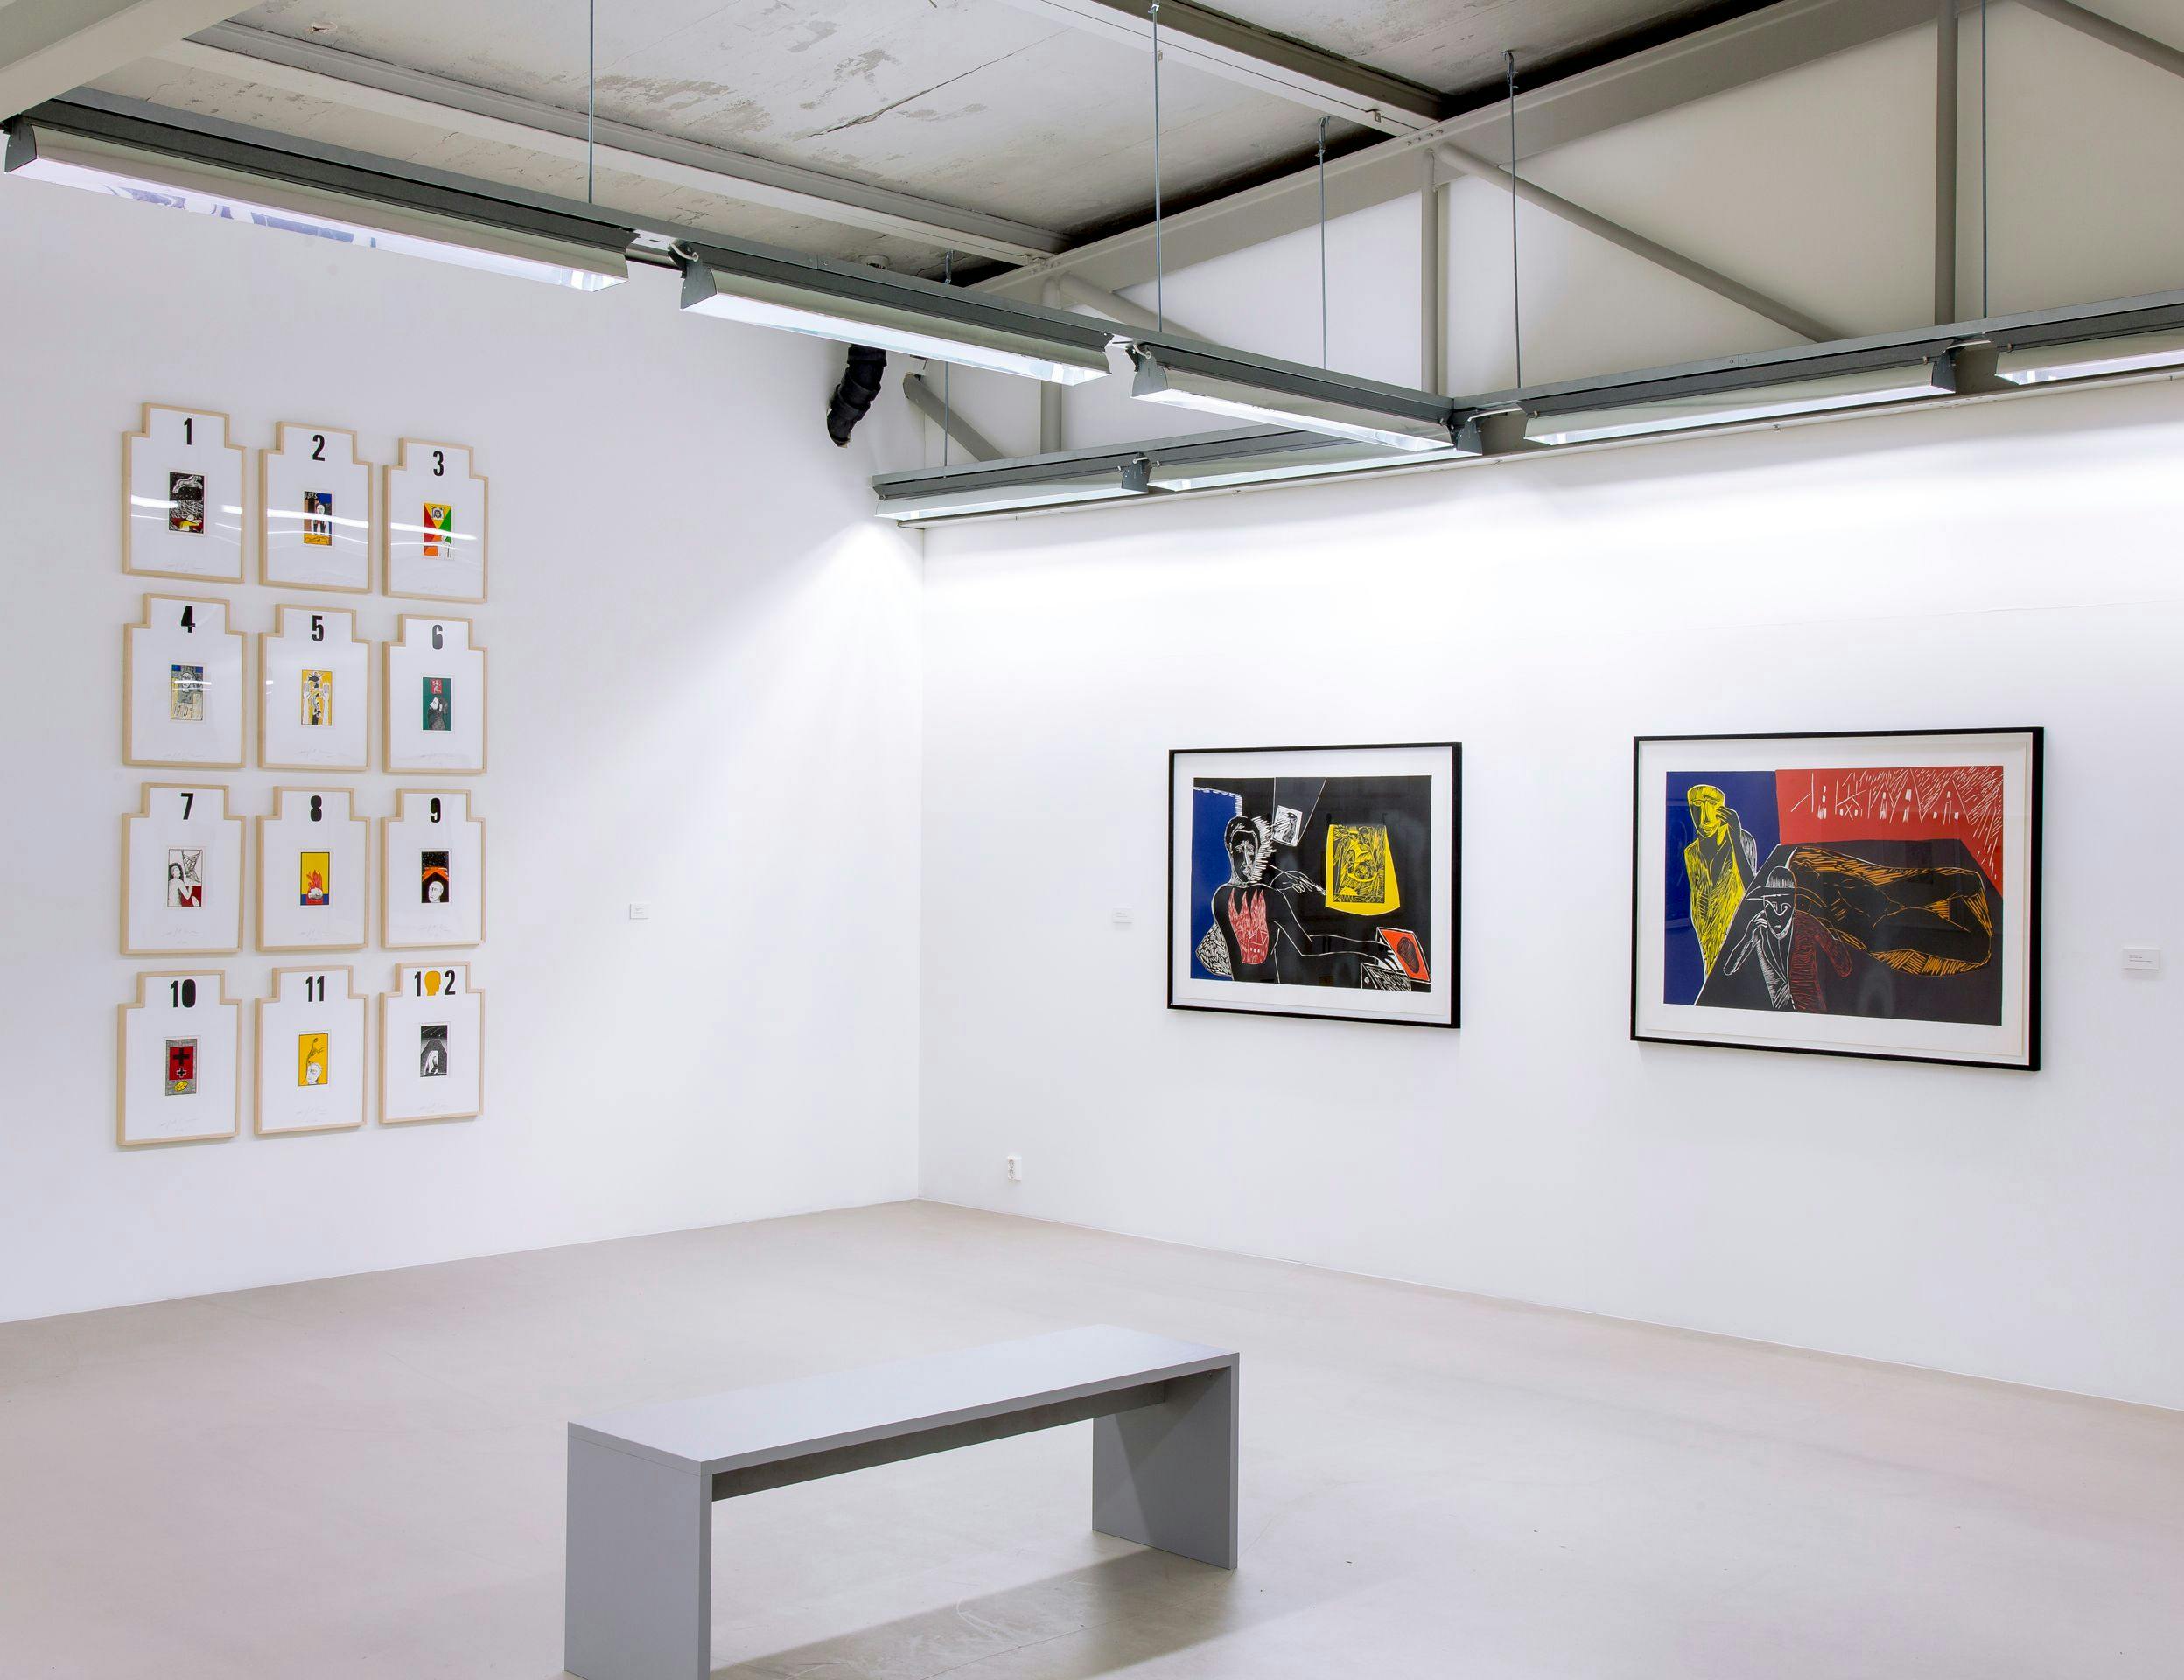 Installation view from the exhibition MIMMO PALADINO (Galleri Star, 2016)